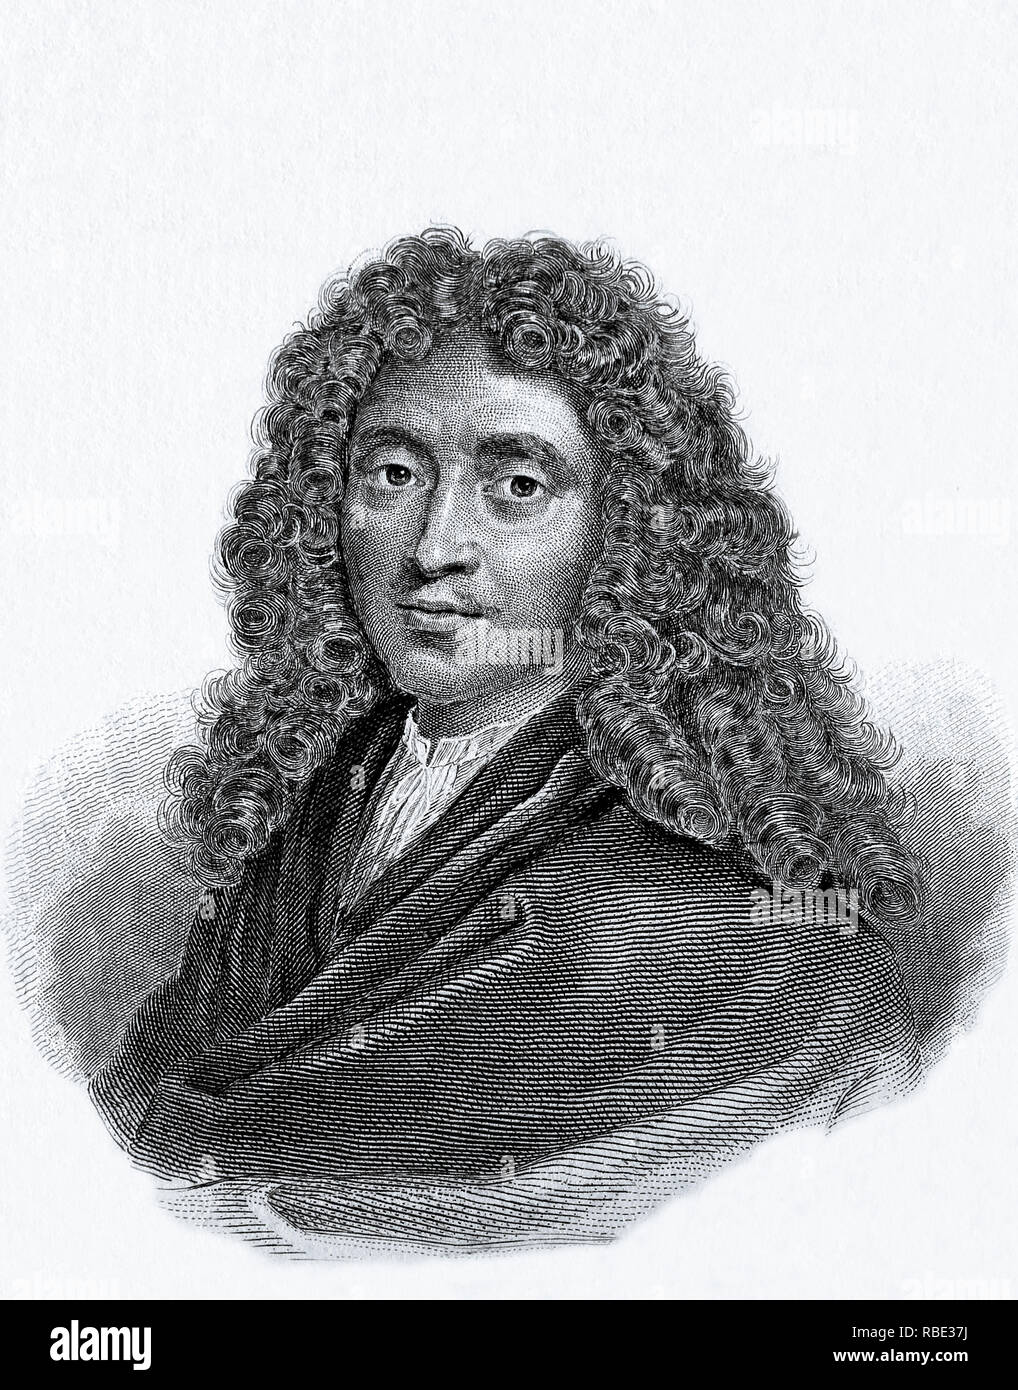 Moliere, Jean-Baptiste Poquelin (1622-1673) famous  French playwright, actor and poet. French culture, French literature. Engraving Stock Photo